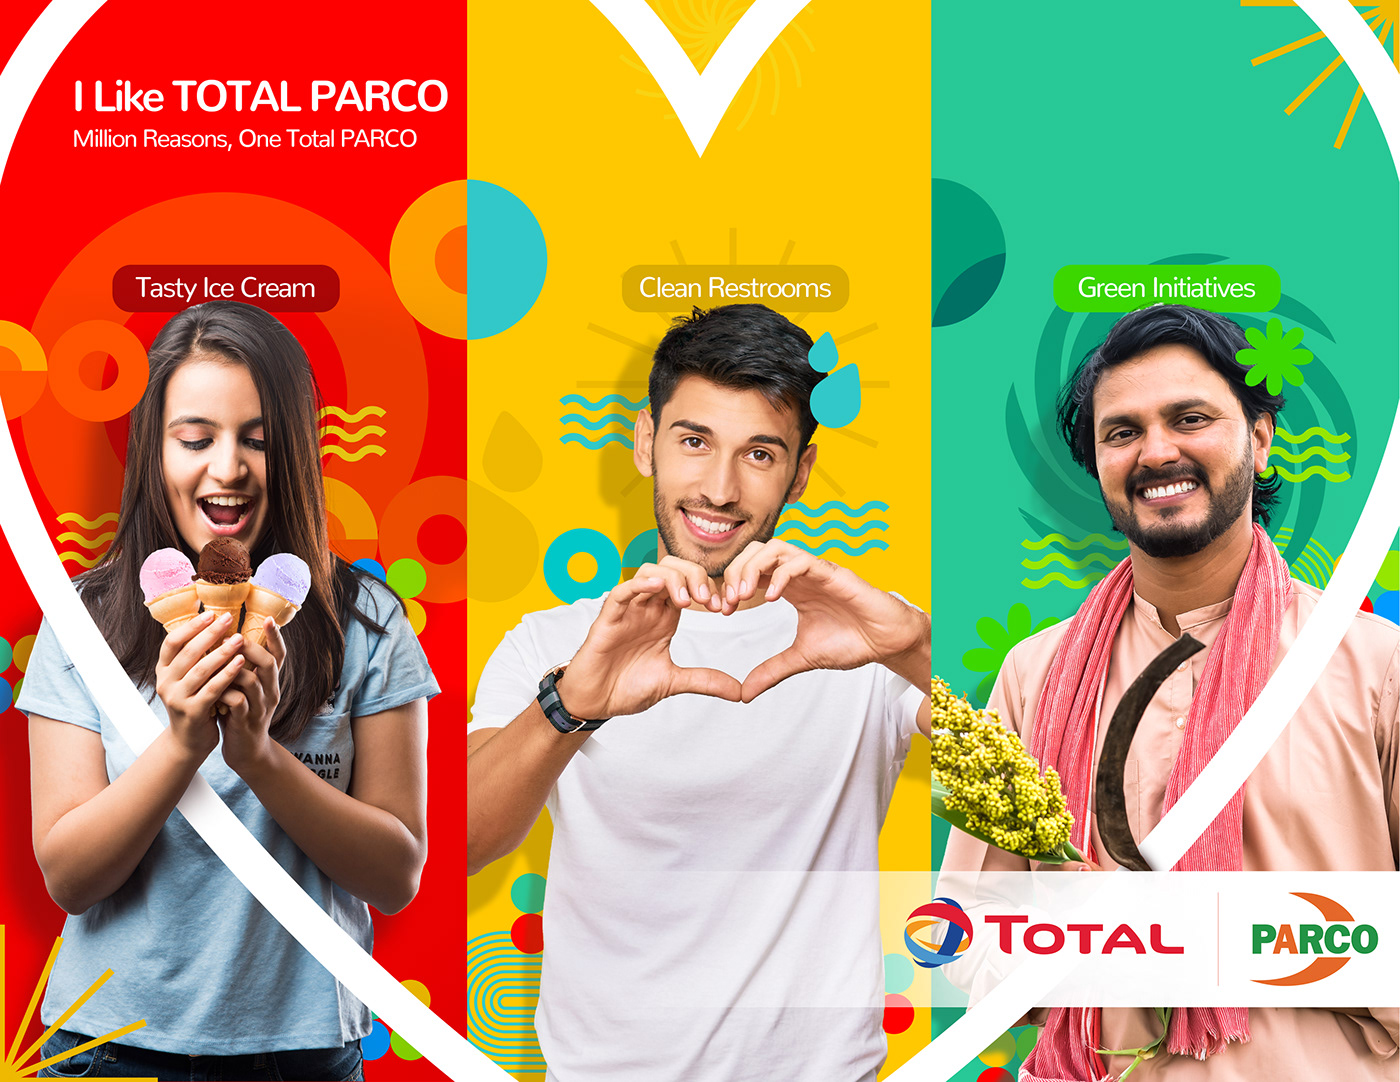 total TOTAL PARCO Pakistan Engine oil Advertising  ads marketing   fuel gas station car Total Parco